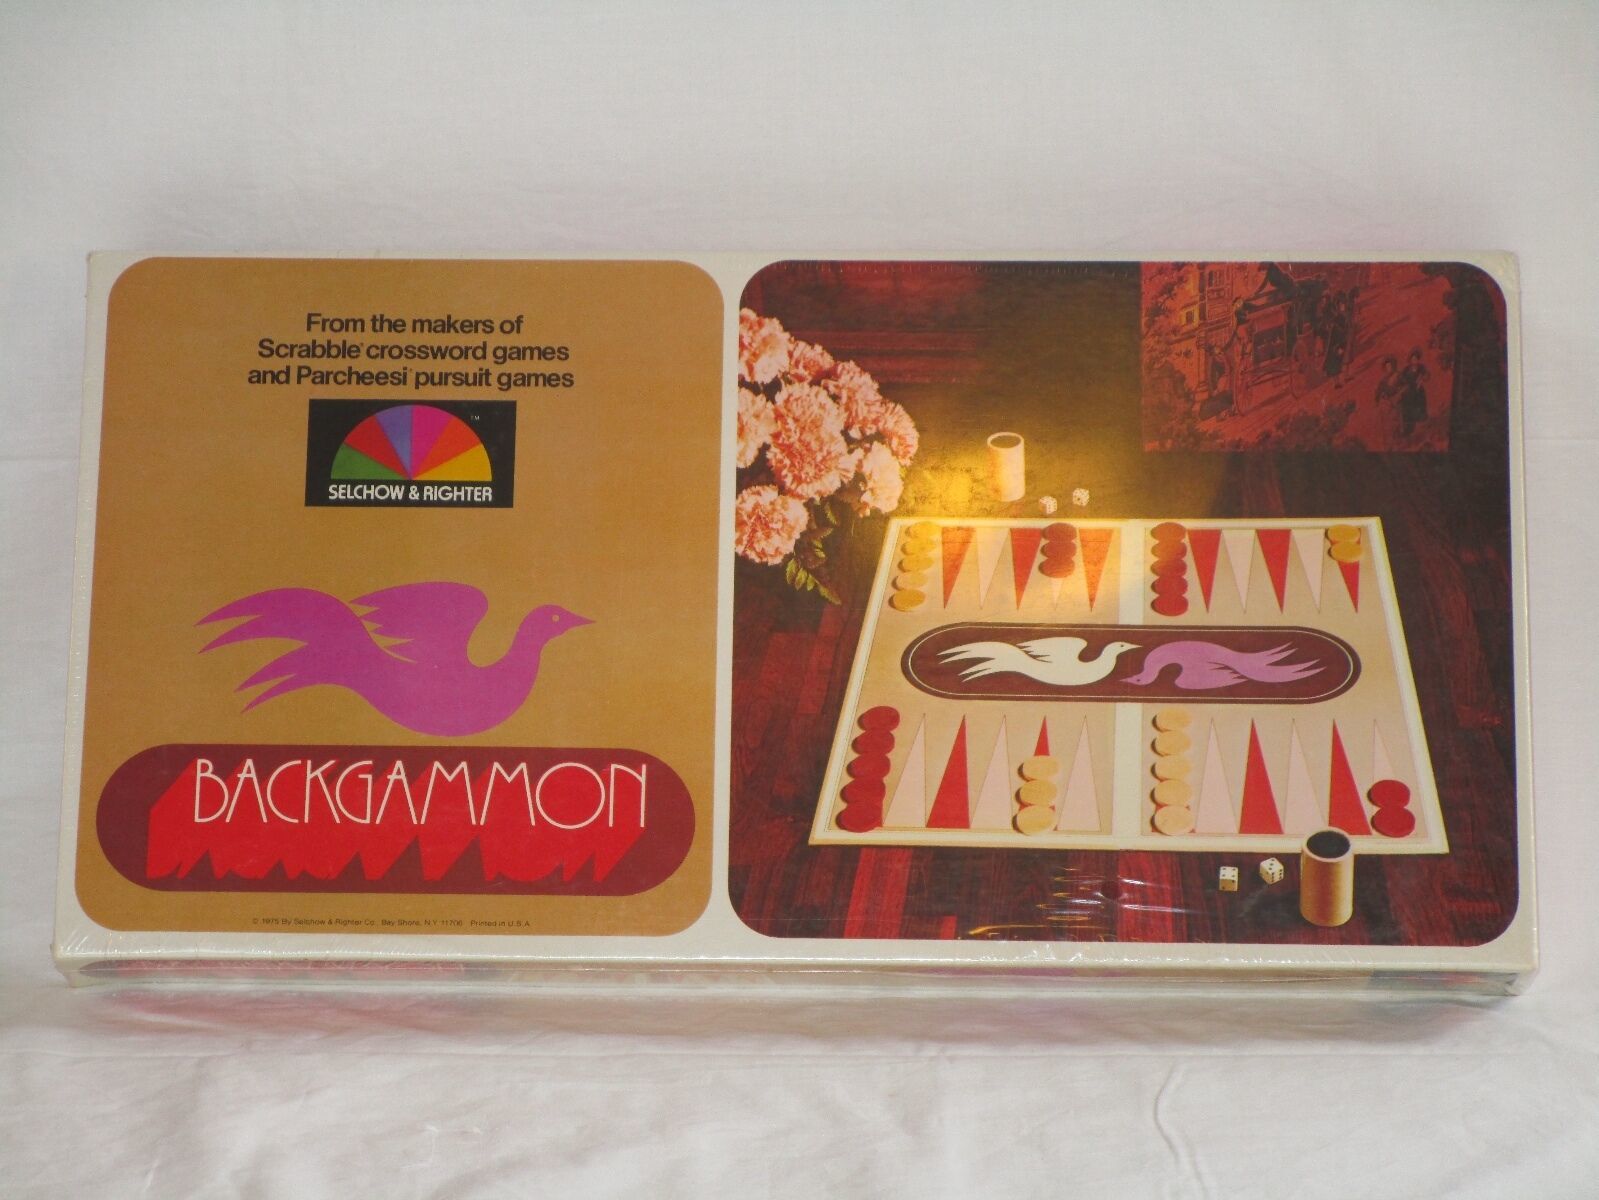 Selchow & Righter 1975 Backgammon Game SEALED - $21.99